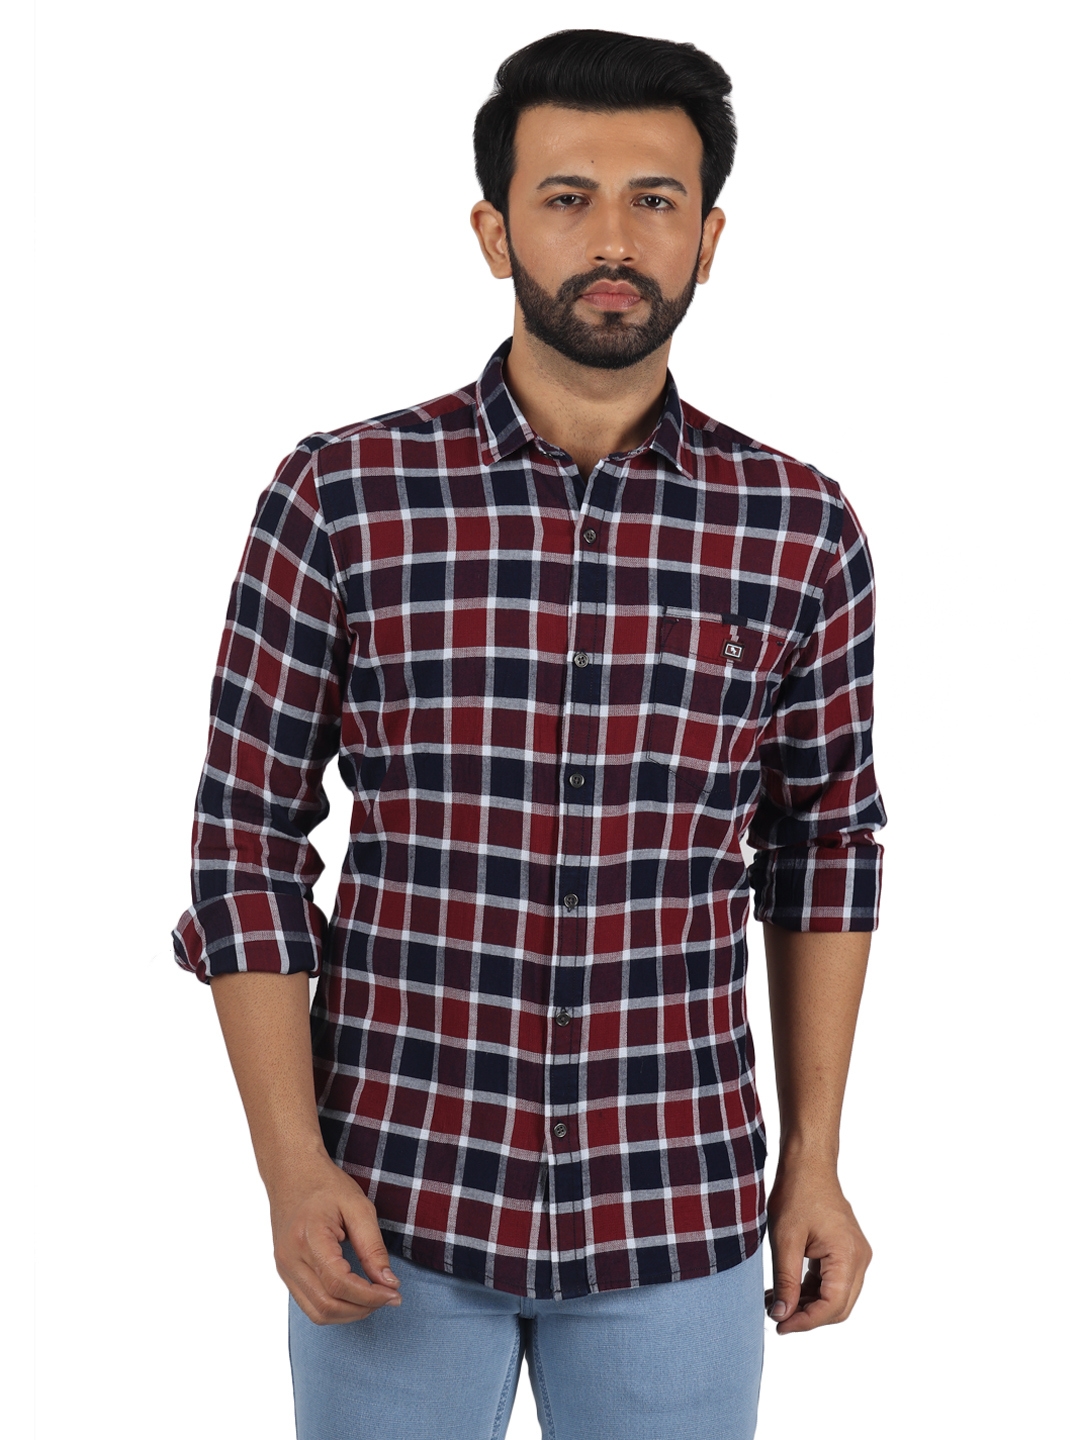 D'cot by Donear | D'cot by Donear Mens Multi Cotton Casual Shirts